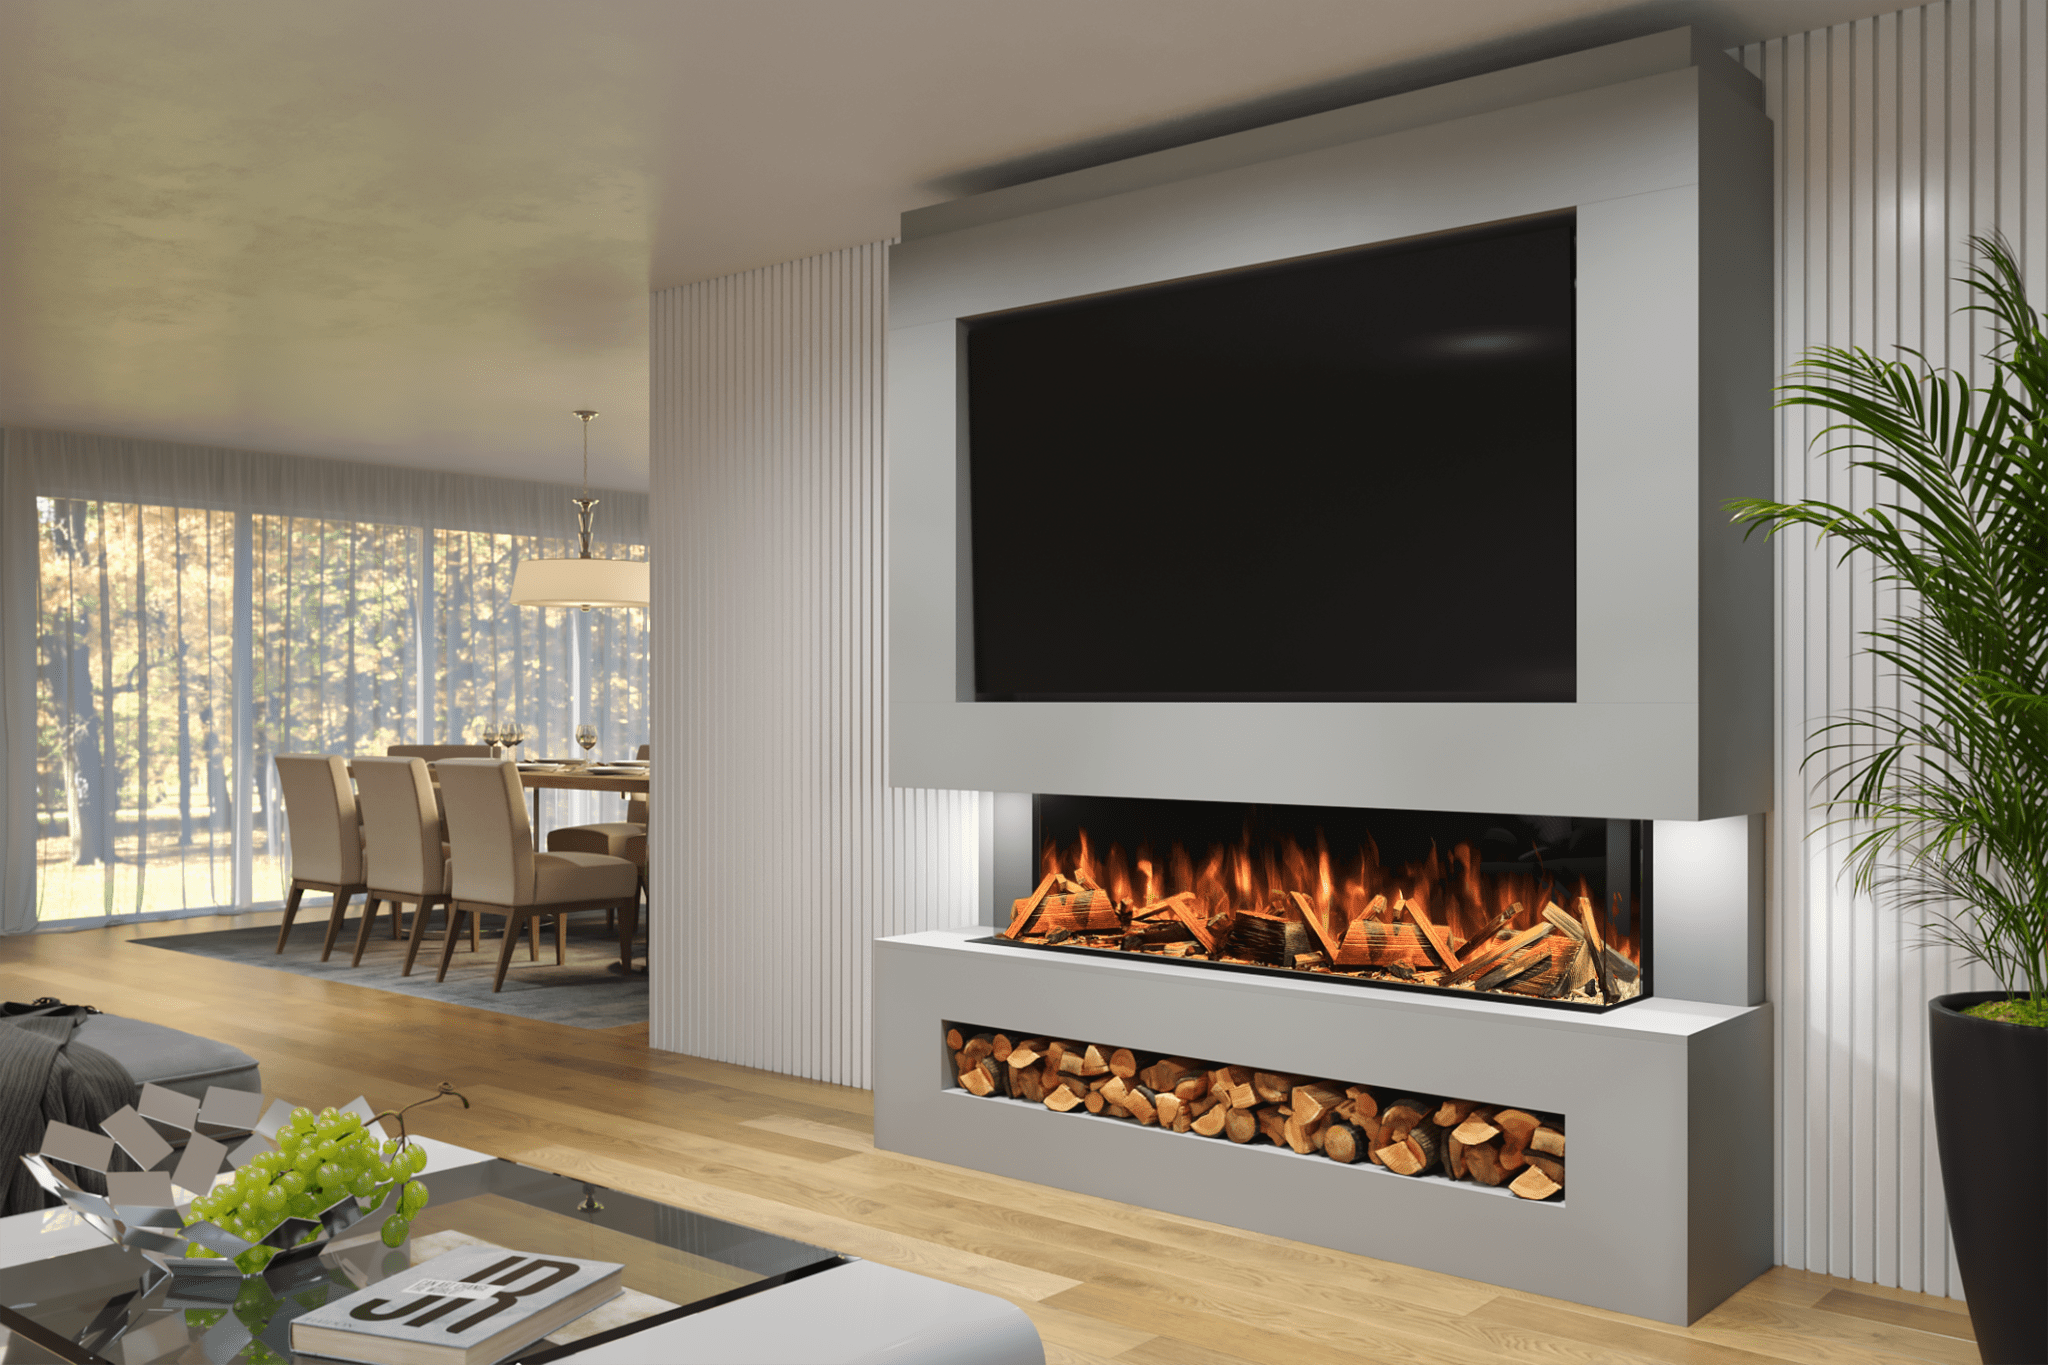 Find Pre-Built Media Wall Fireplace in the UK